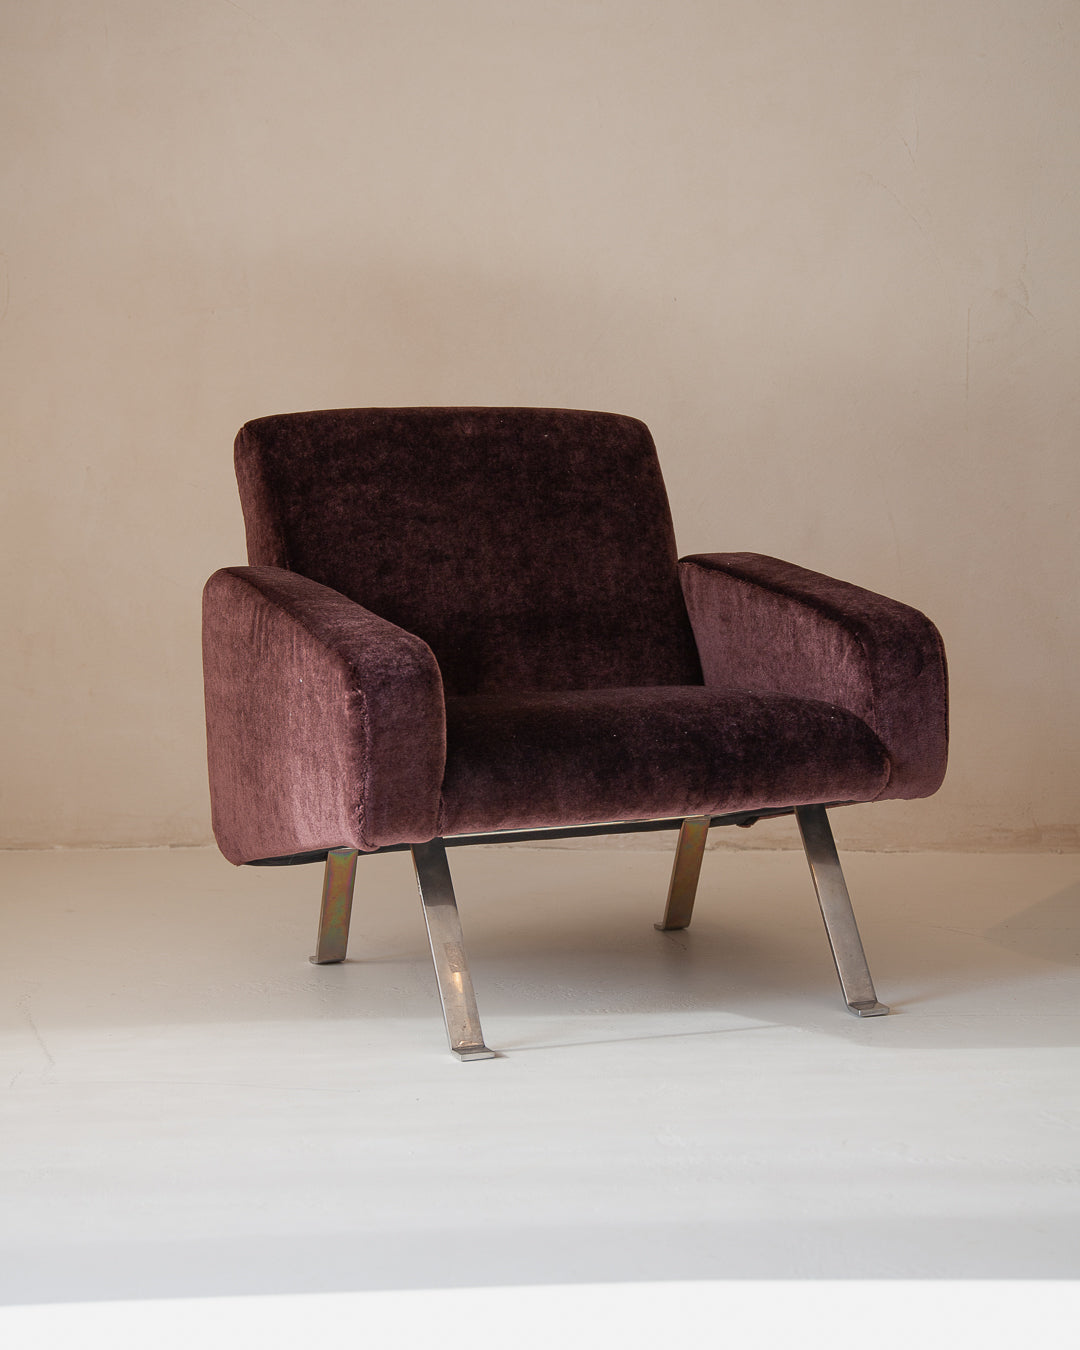 Pair of "740" armchairs by Joseph André Mote